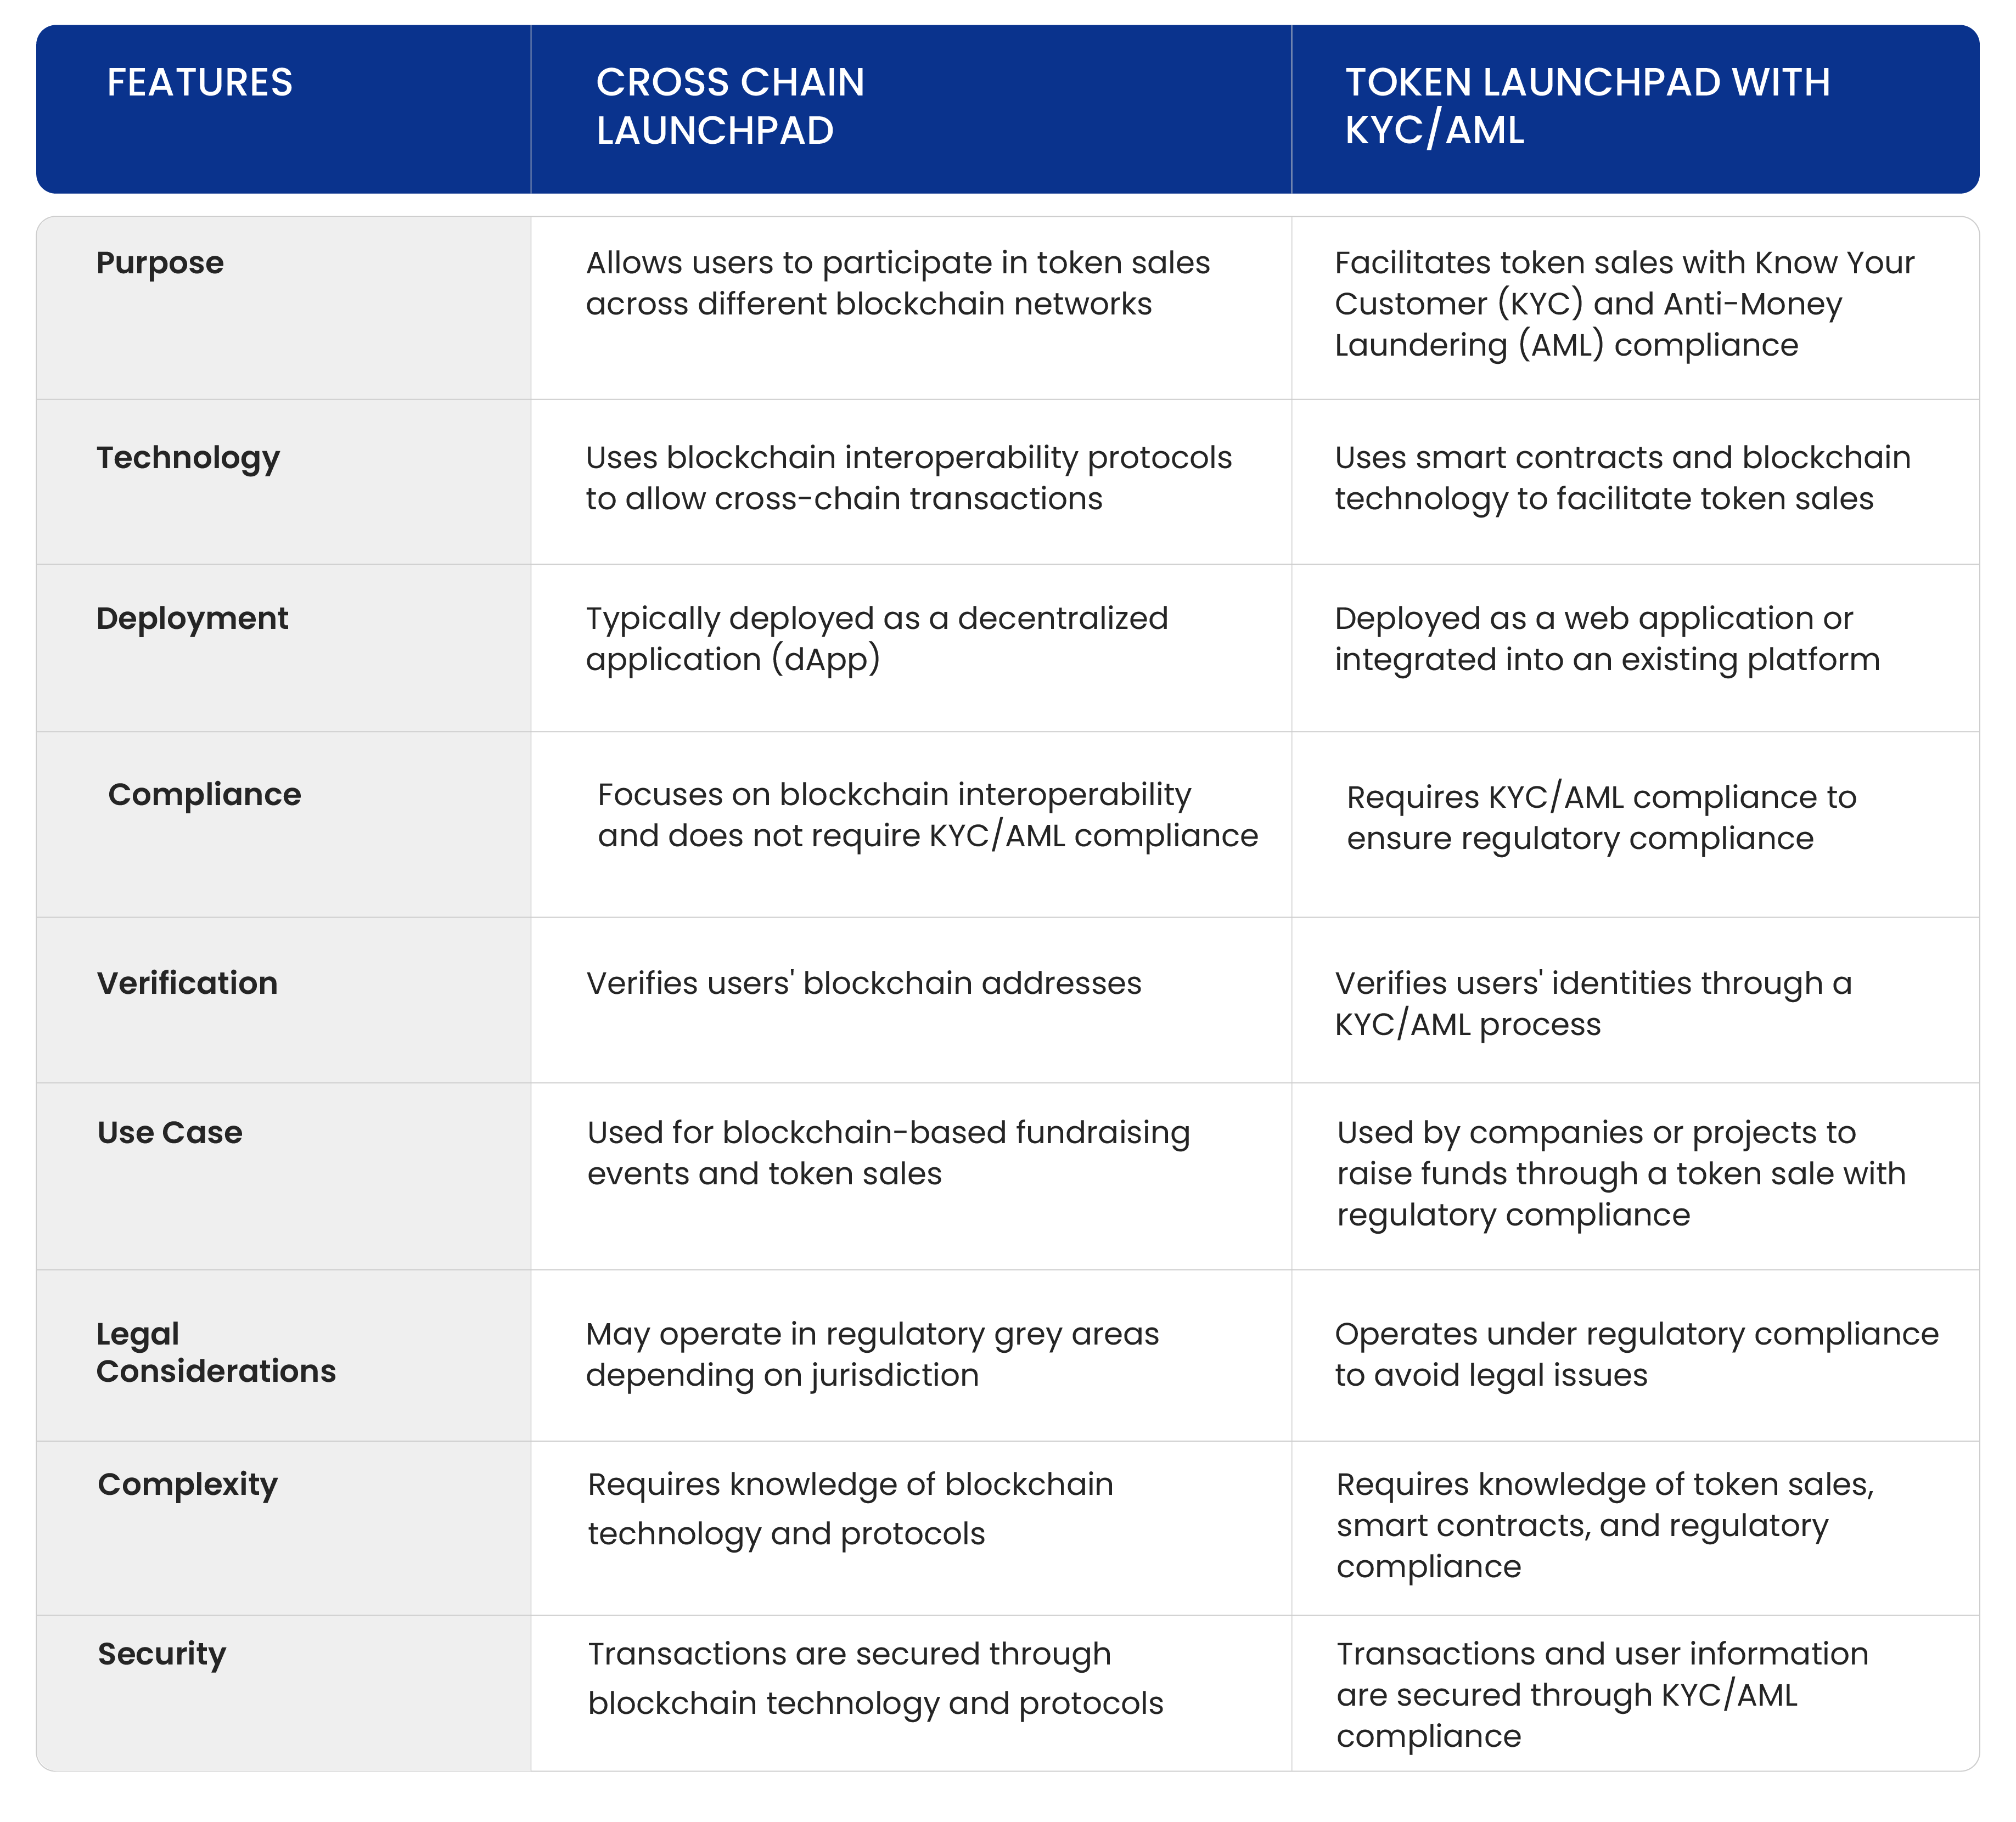 Comparison Between Cross-chain Launchpad and Token Launchpad with KYC/AML